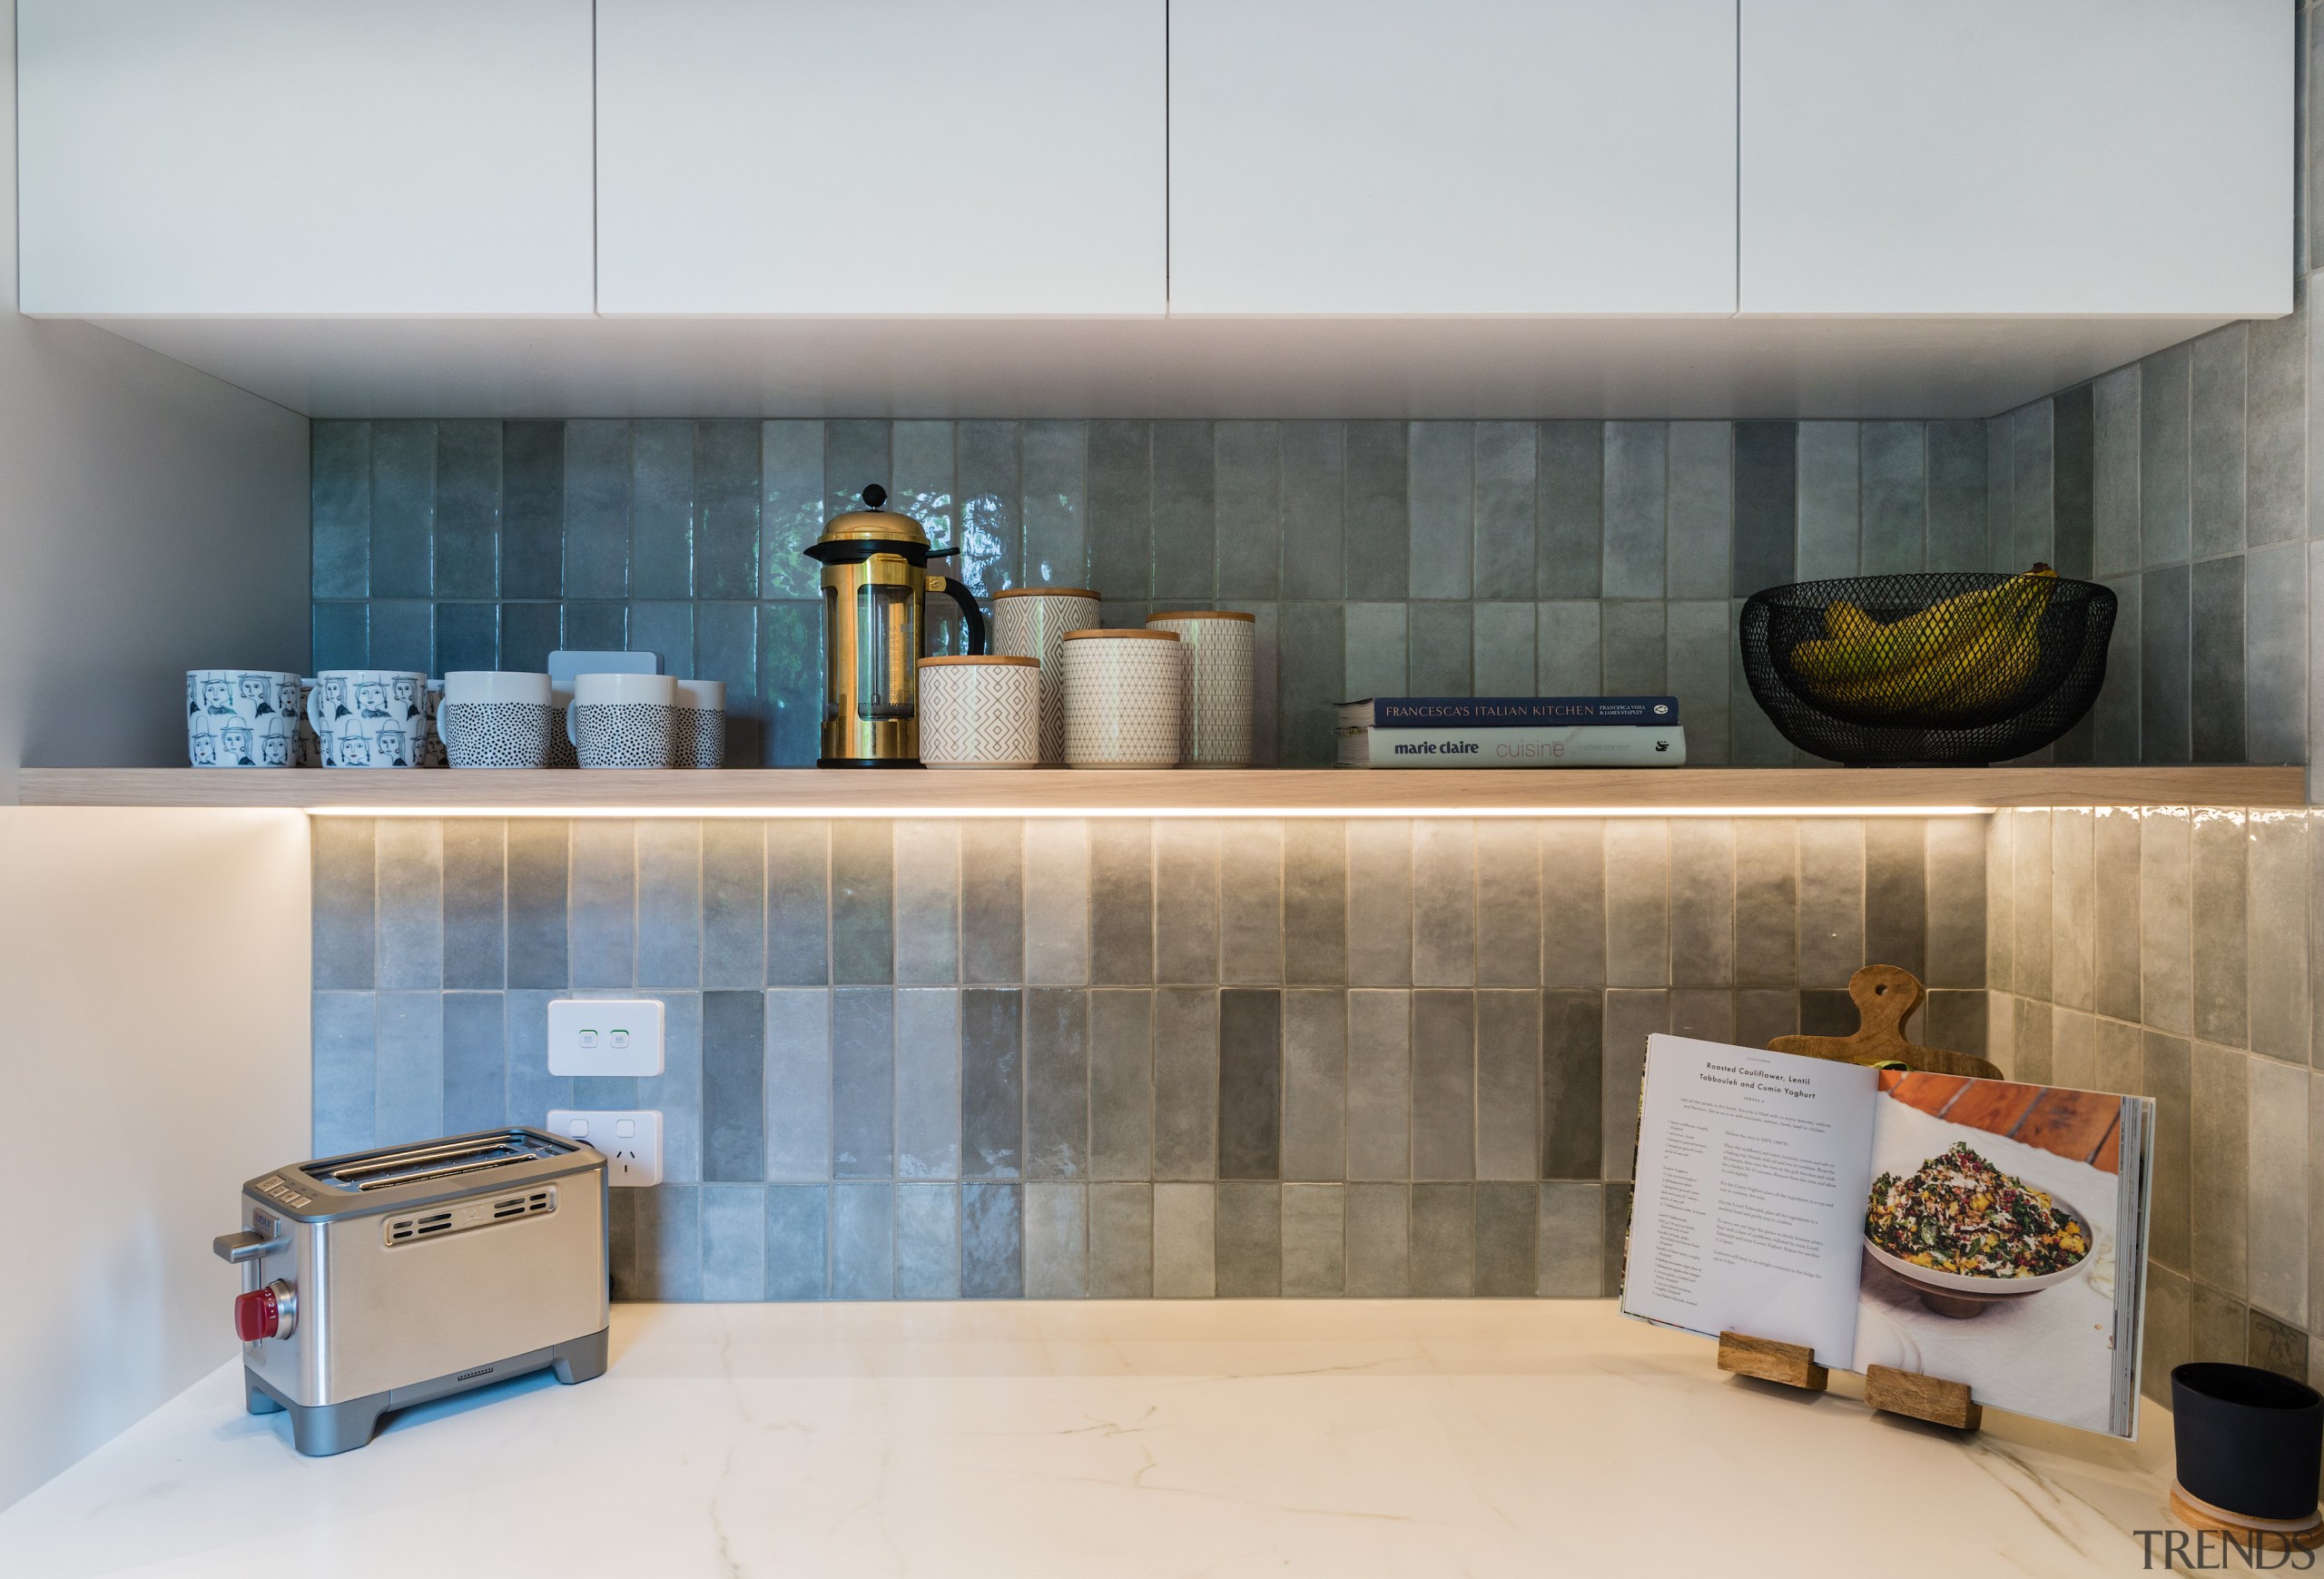 A nook, niche and eye-catching splashback all feature 